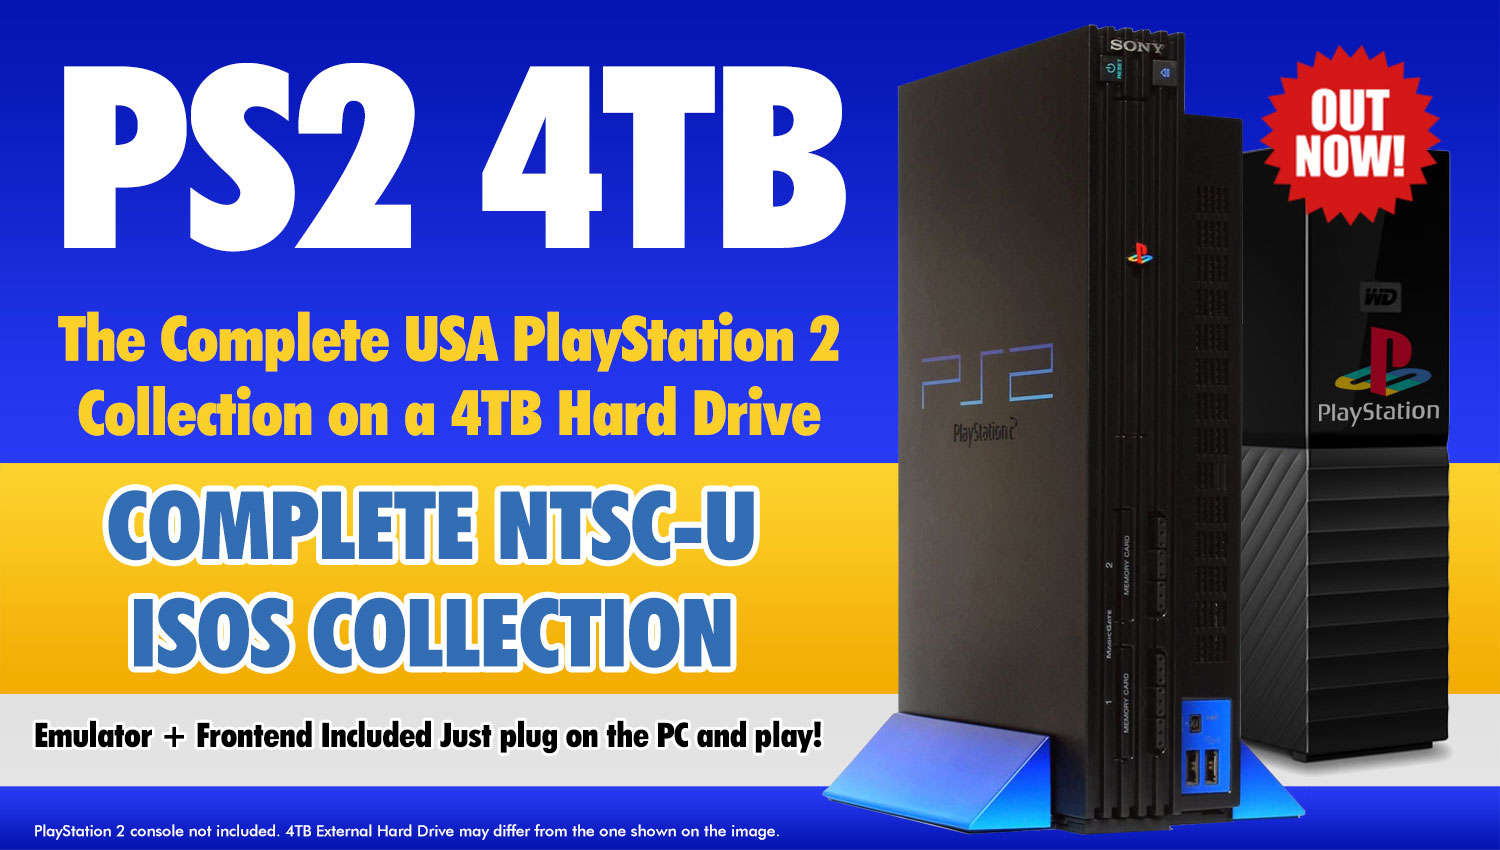 PS2 Complete USA Collection on Hard Drive Out Now! - RetroMini Store